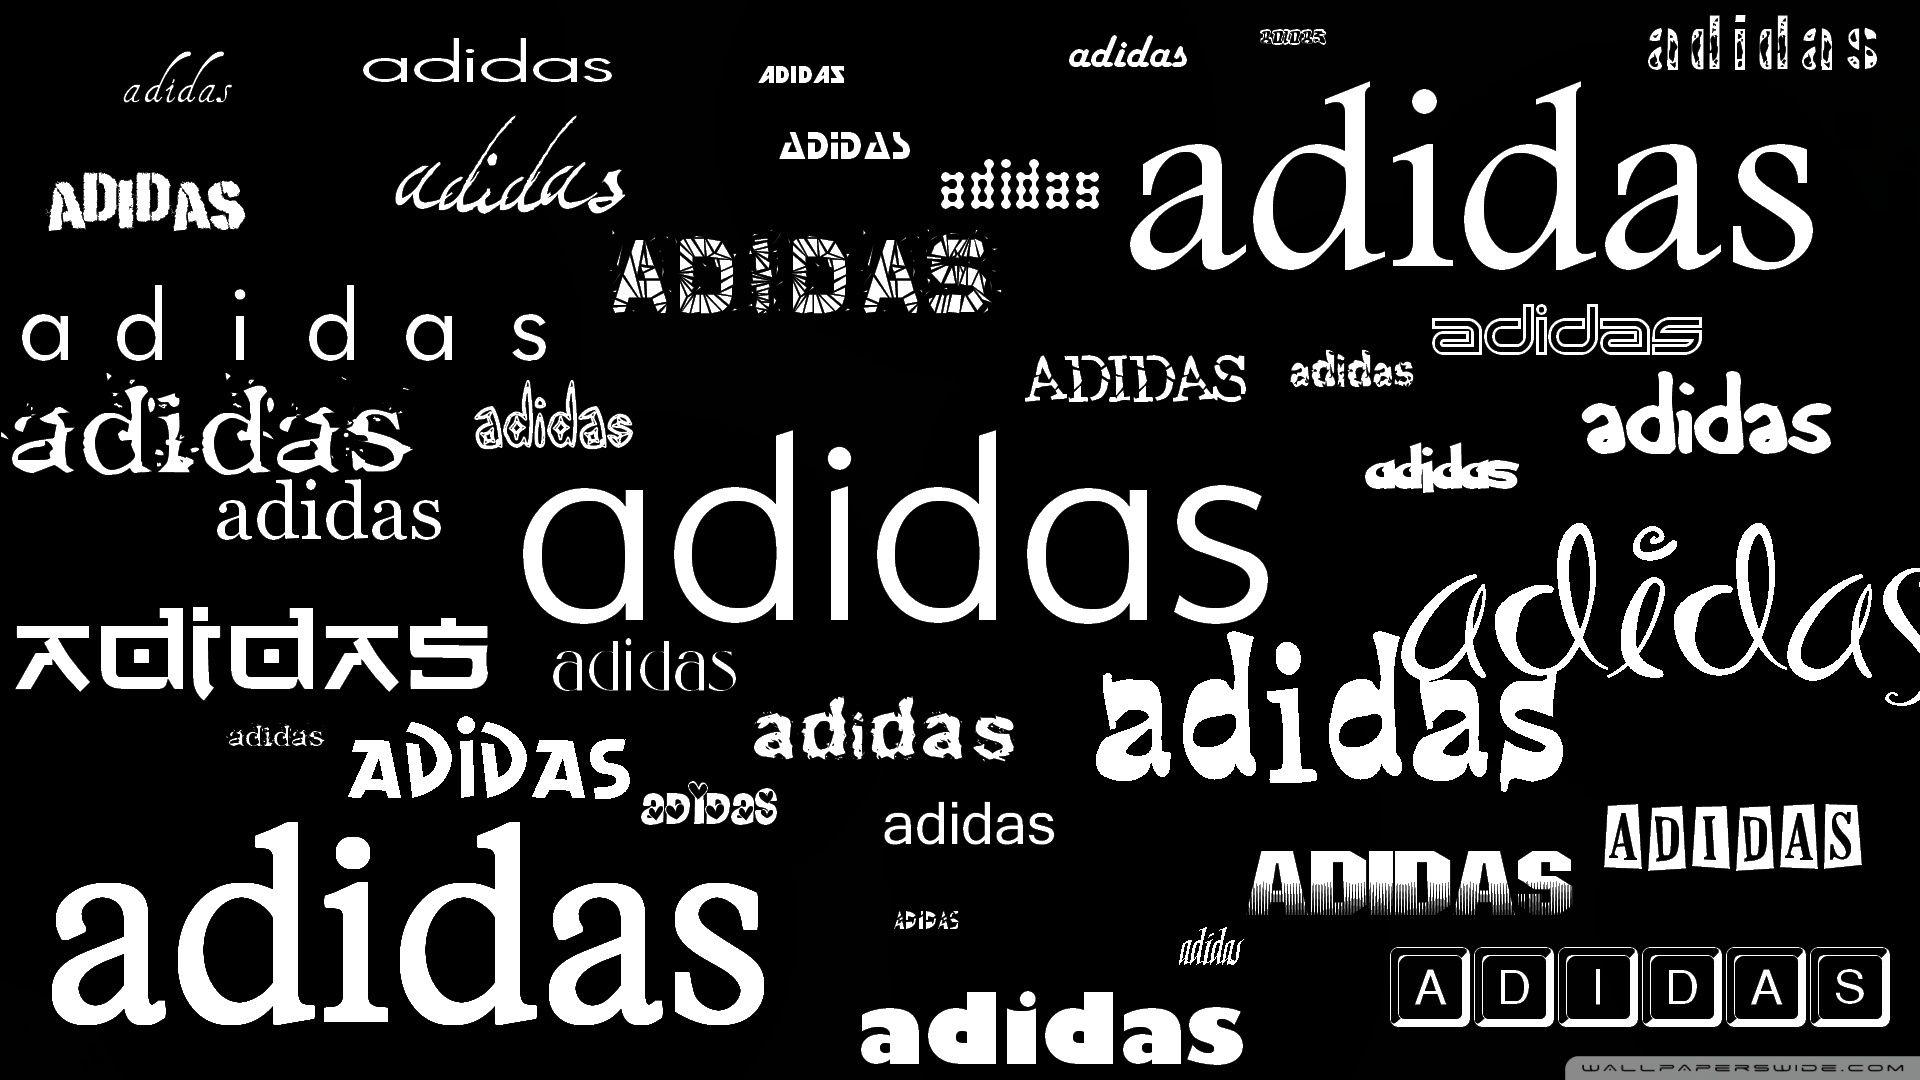 Adidas inscription in different languages wallpaper and image